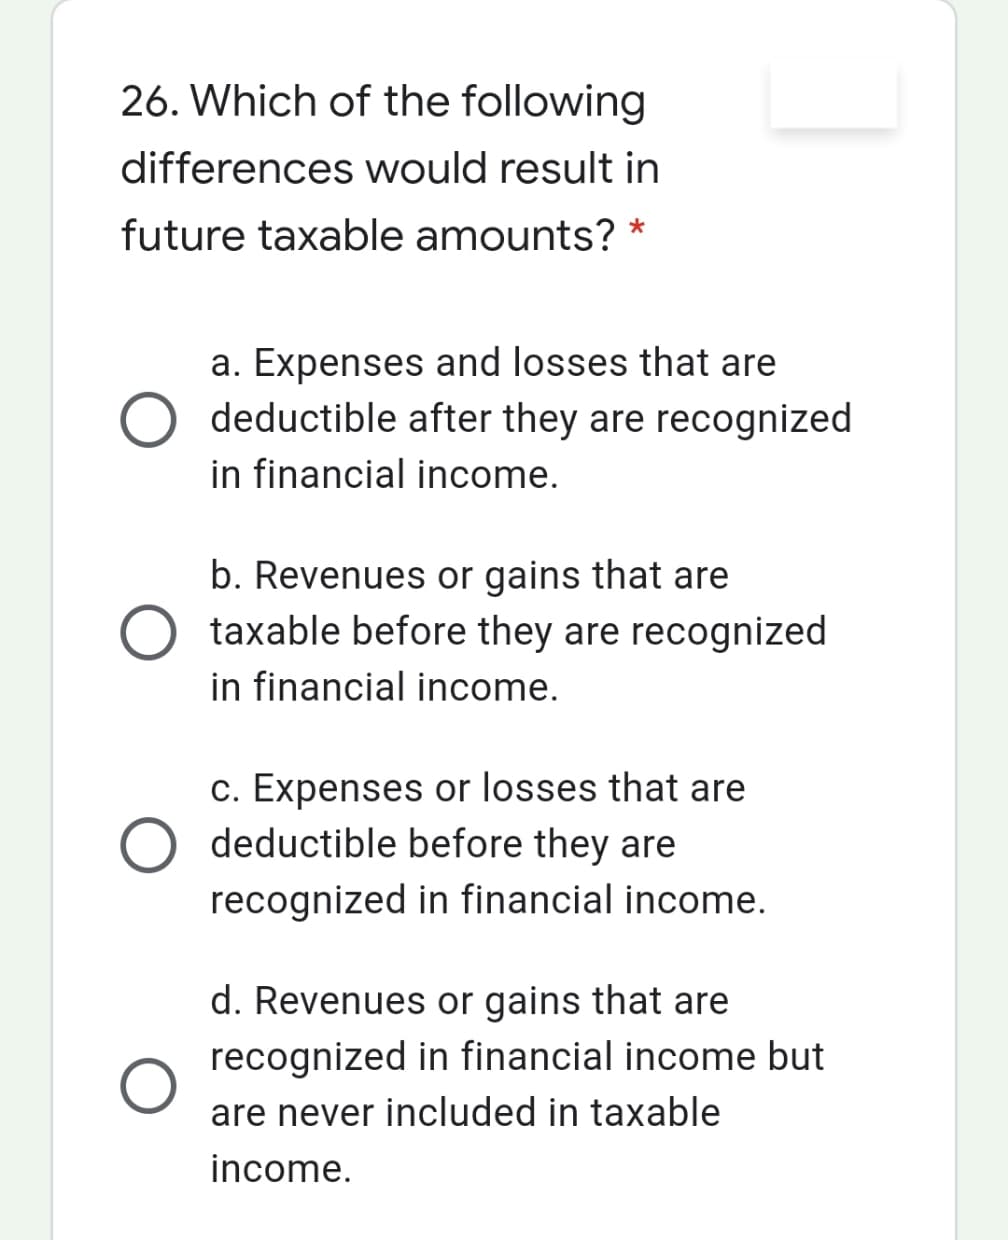 26. Which of the following
differences would result in
future taxable amounts? *
a. Expenses and losses that are
O deductible after they are recognized
in financial income.
b. Revenues or gains that are
taxable before they are recognized
in financial income.
c. Expenses or losses that are
deductible before they are
recognized in financial income.
d. Revenues or gains that are
recognized in financial income but
are never included in taxable
income.
